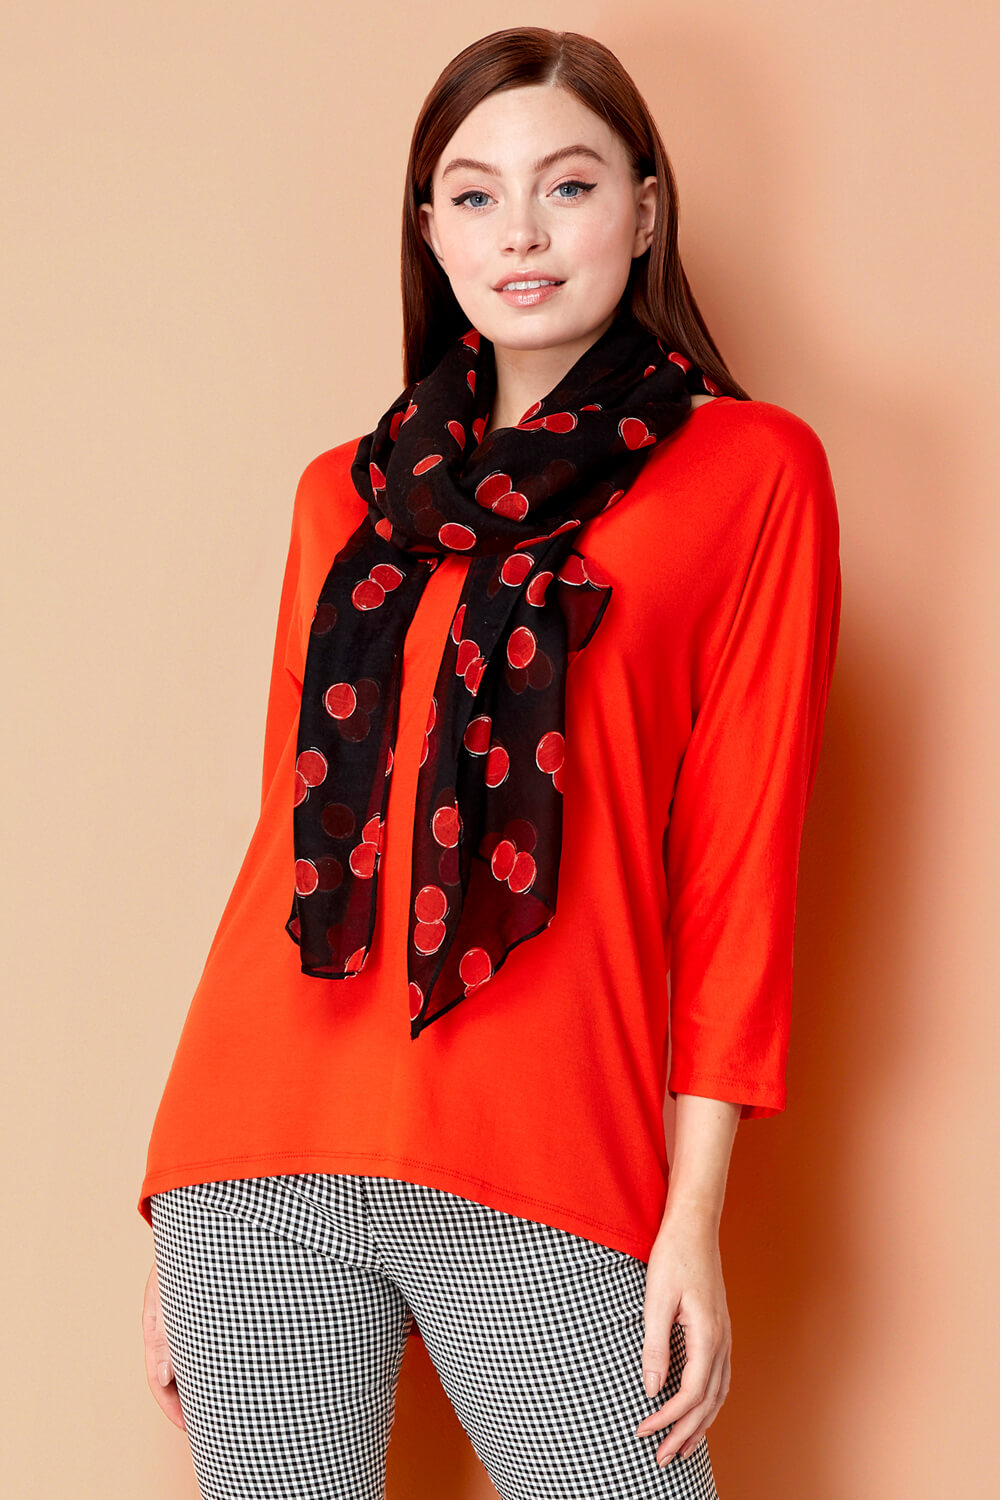 Loose T-Shirt and Cherry Print Scarf